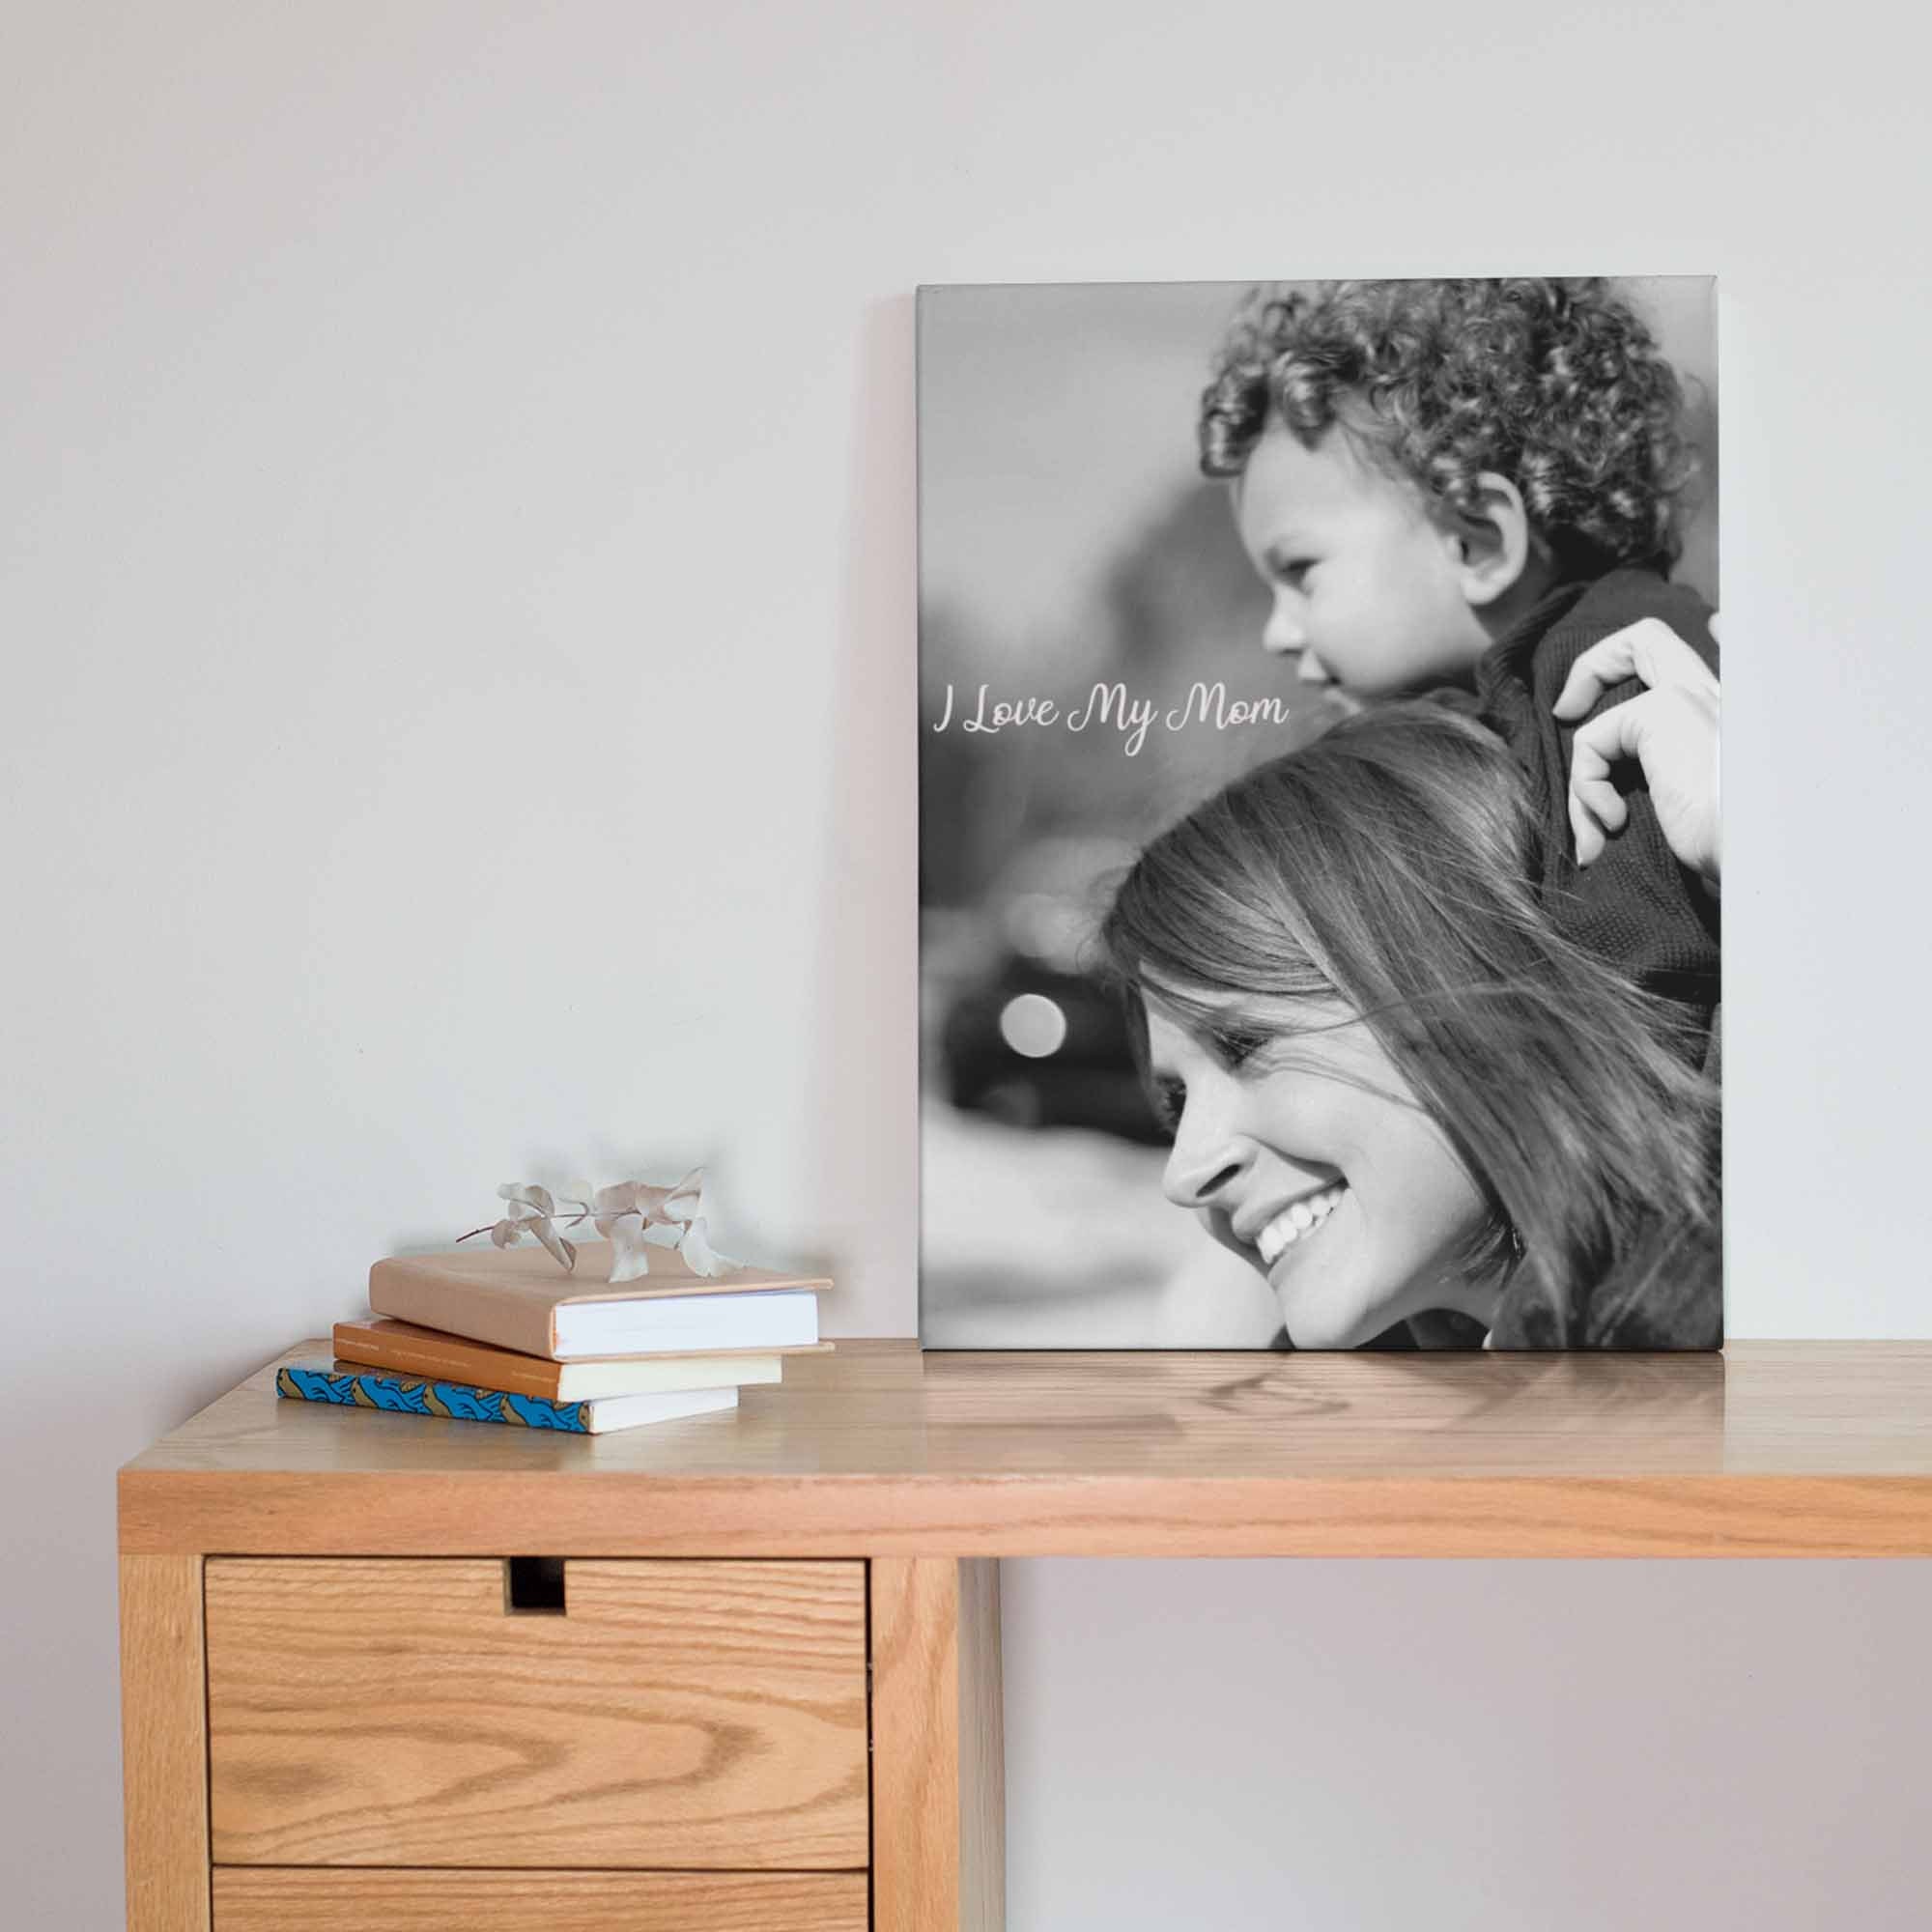 Cozy Frames - Personalized Canvas Prints For Your Home